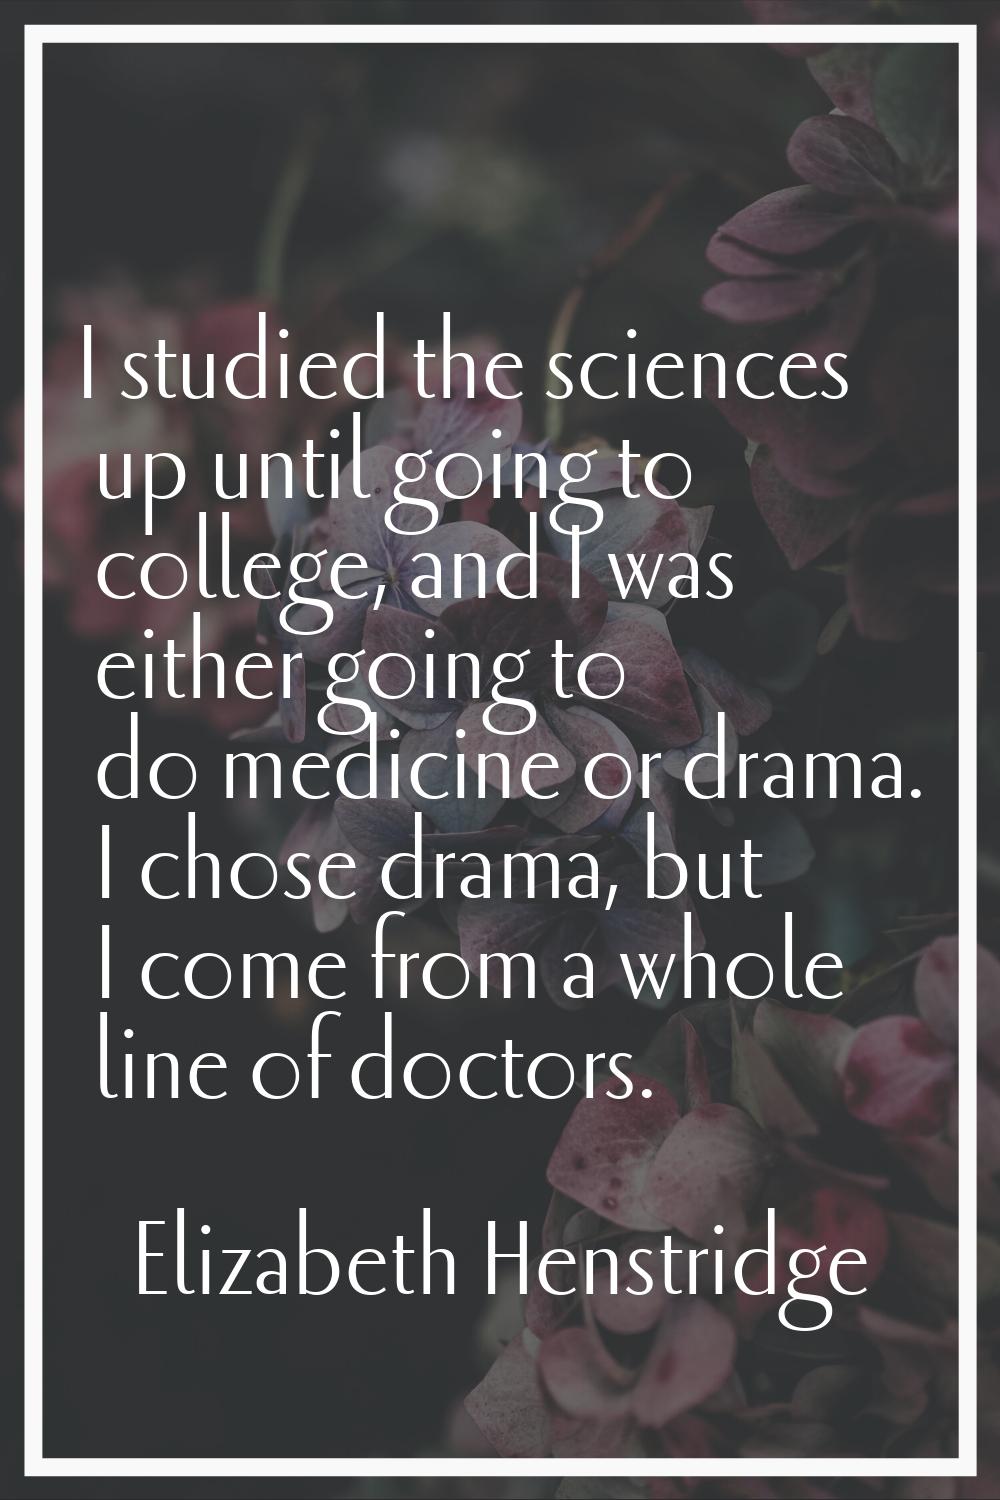 I studied the sciences up until going to college, and I was either going to do medicine or drama. I